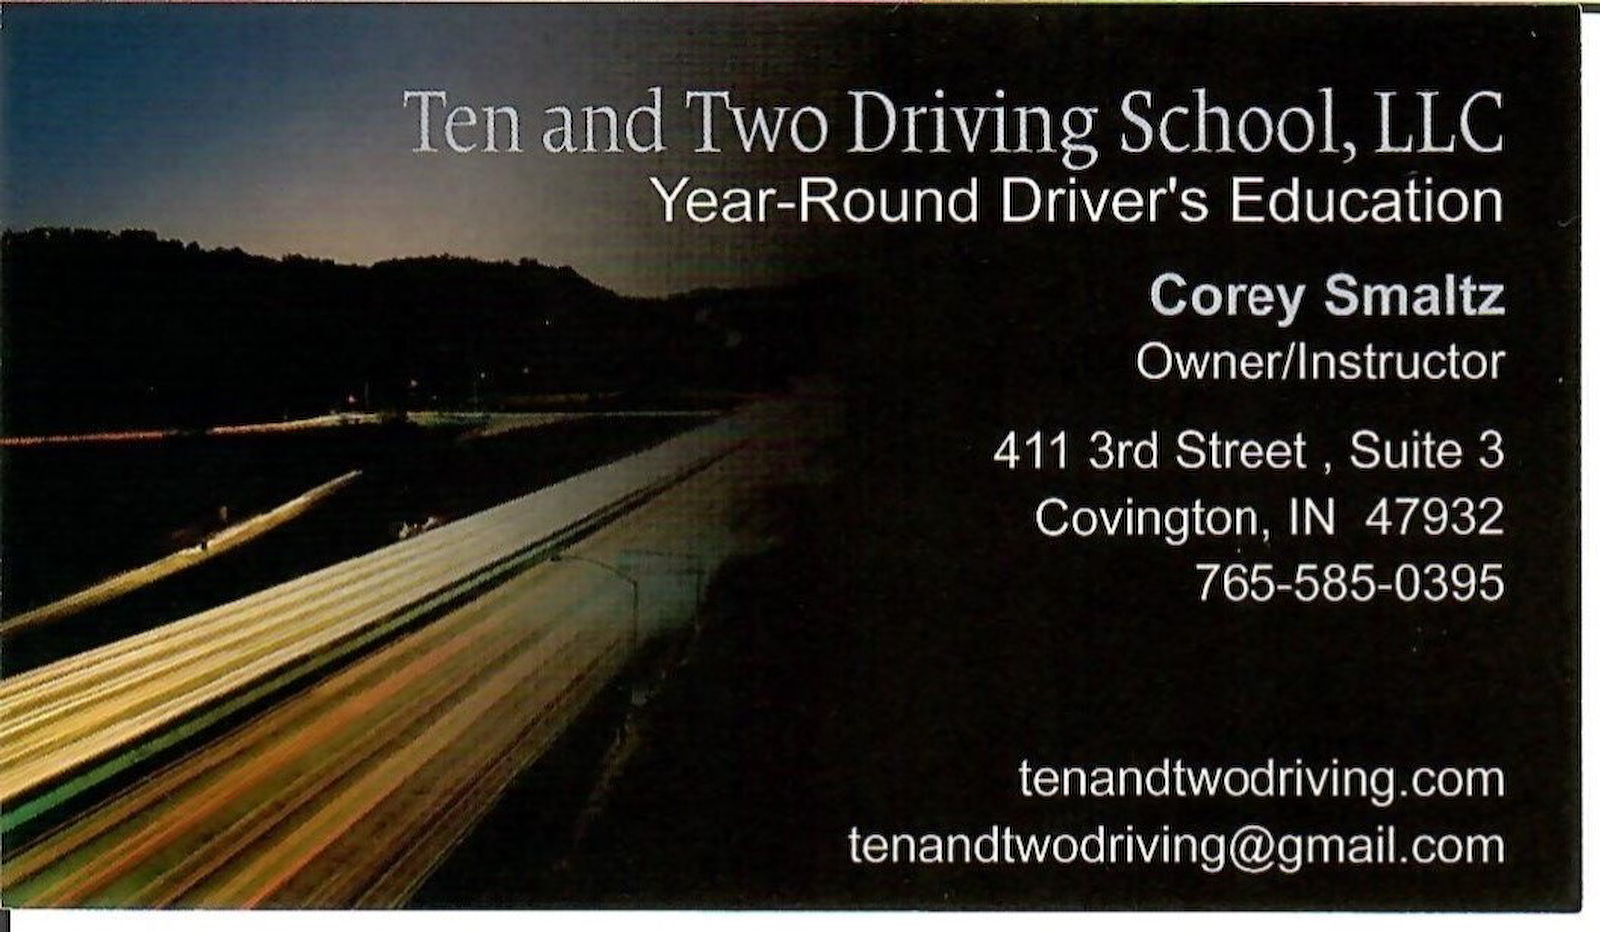 Ten and Two Driving School